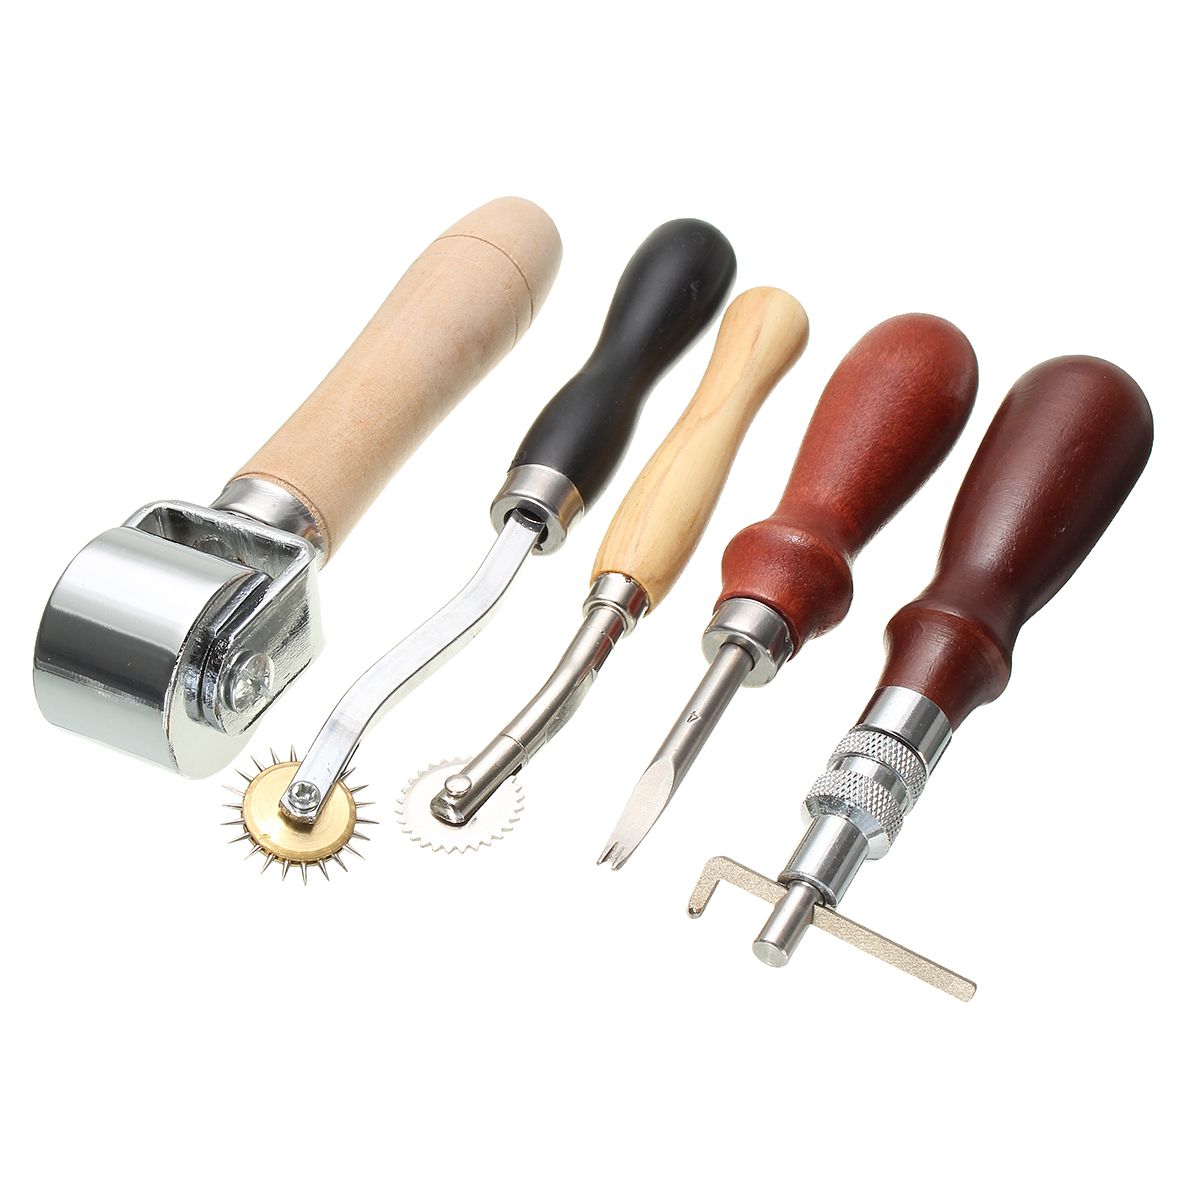 59-Pieces-Leather-Craft-Tool-Kit-for-Hand-Sewing-Stitching-Stamping-Set-Saddle-Making-Tool-1363275